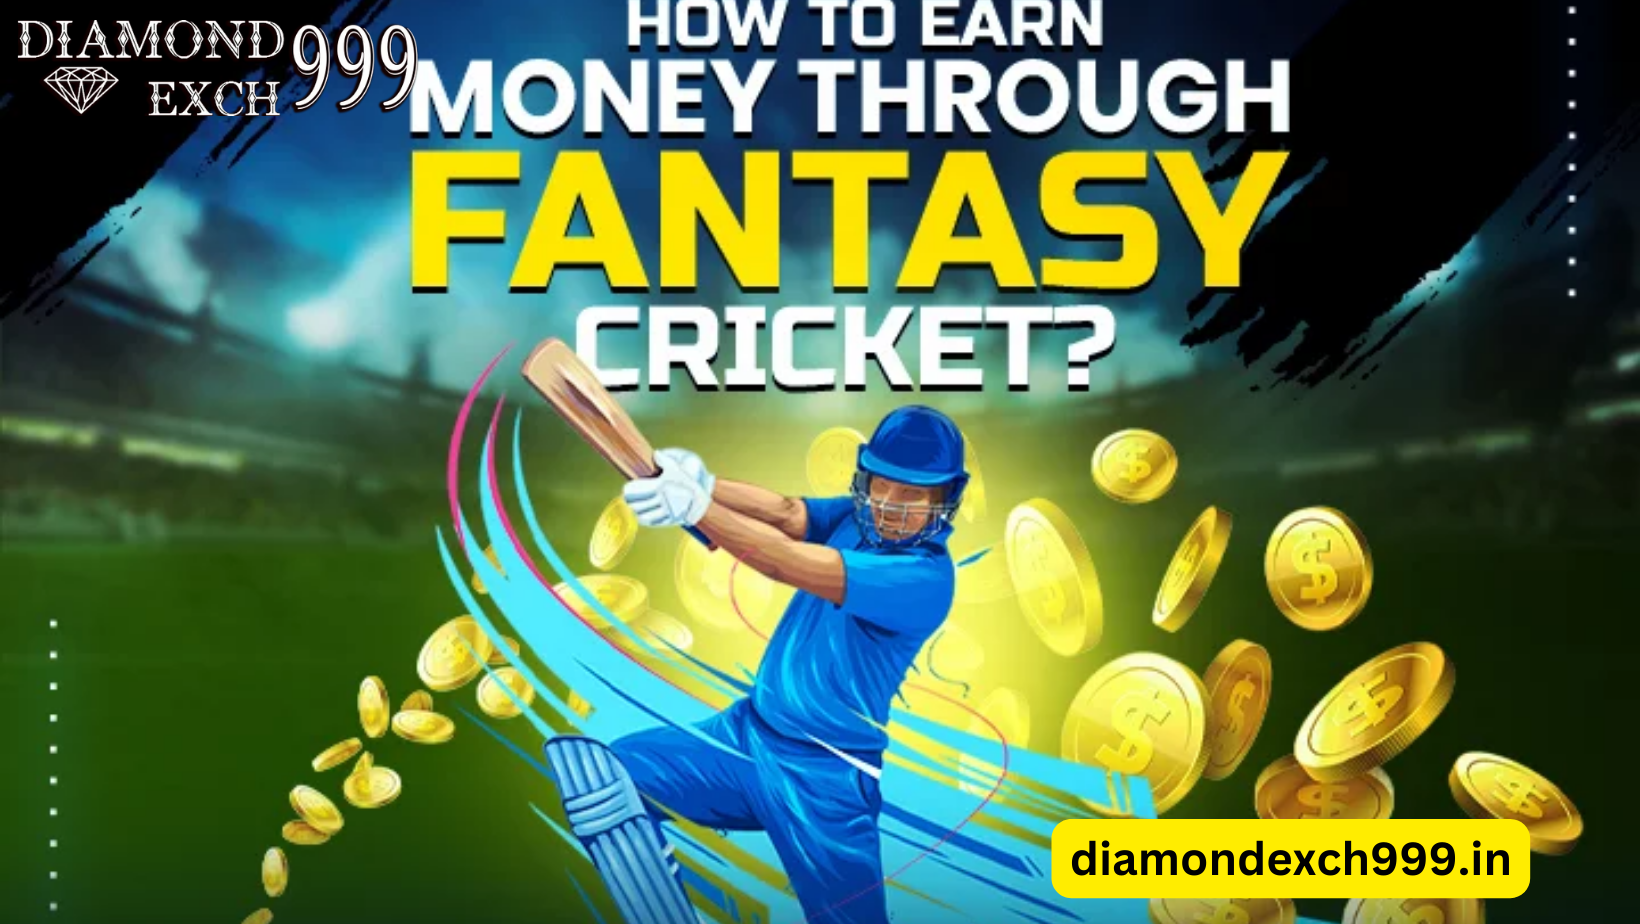 Play Fantasy cricket and win cash at Diamond exch